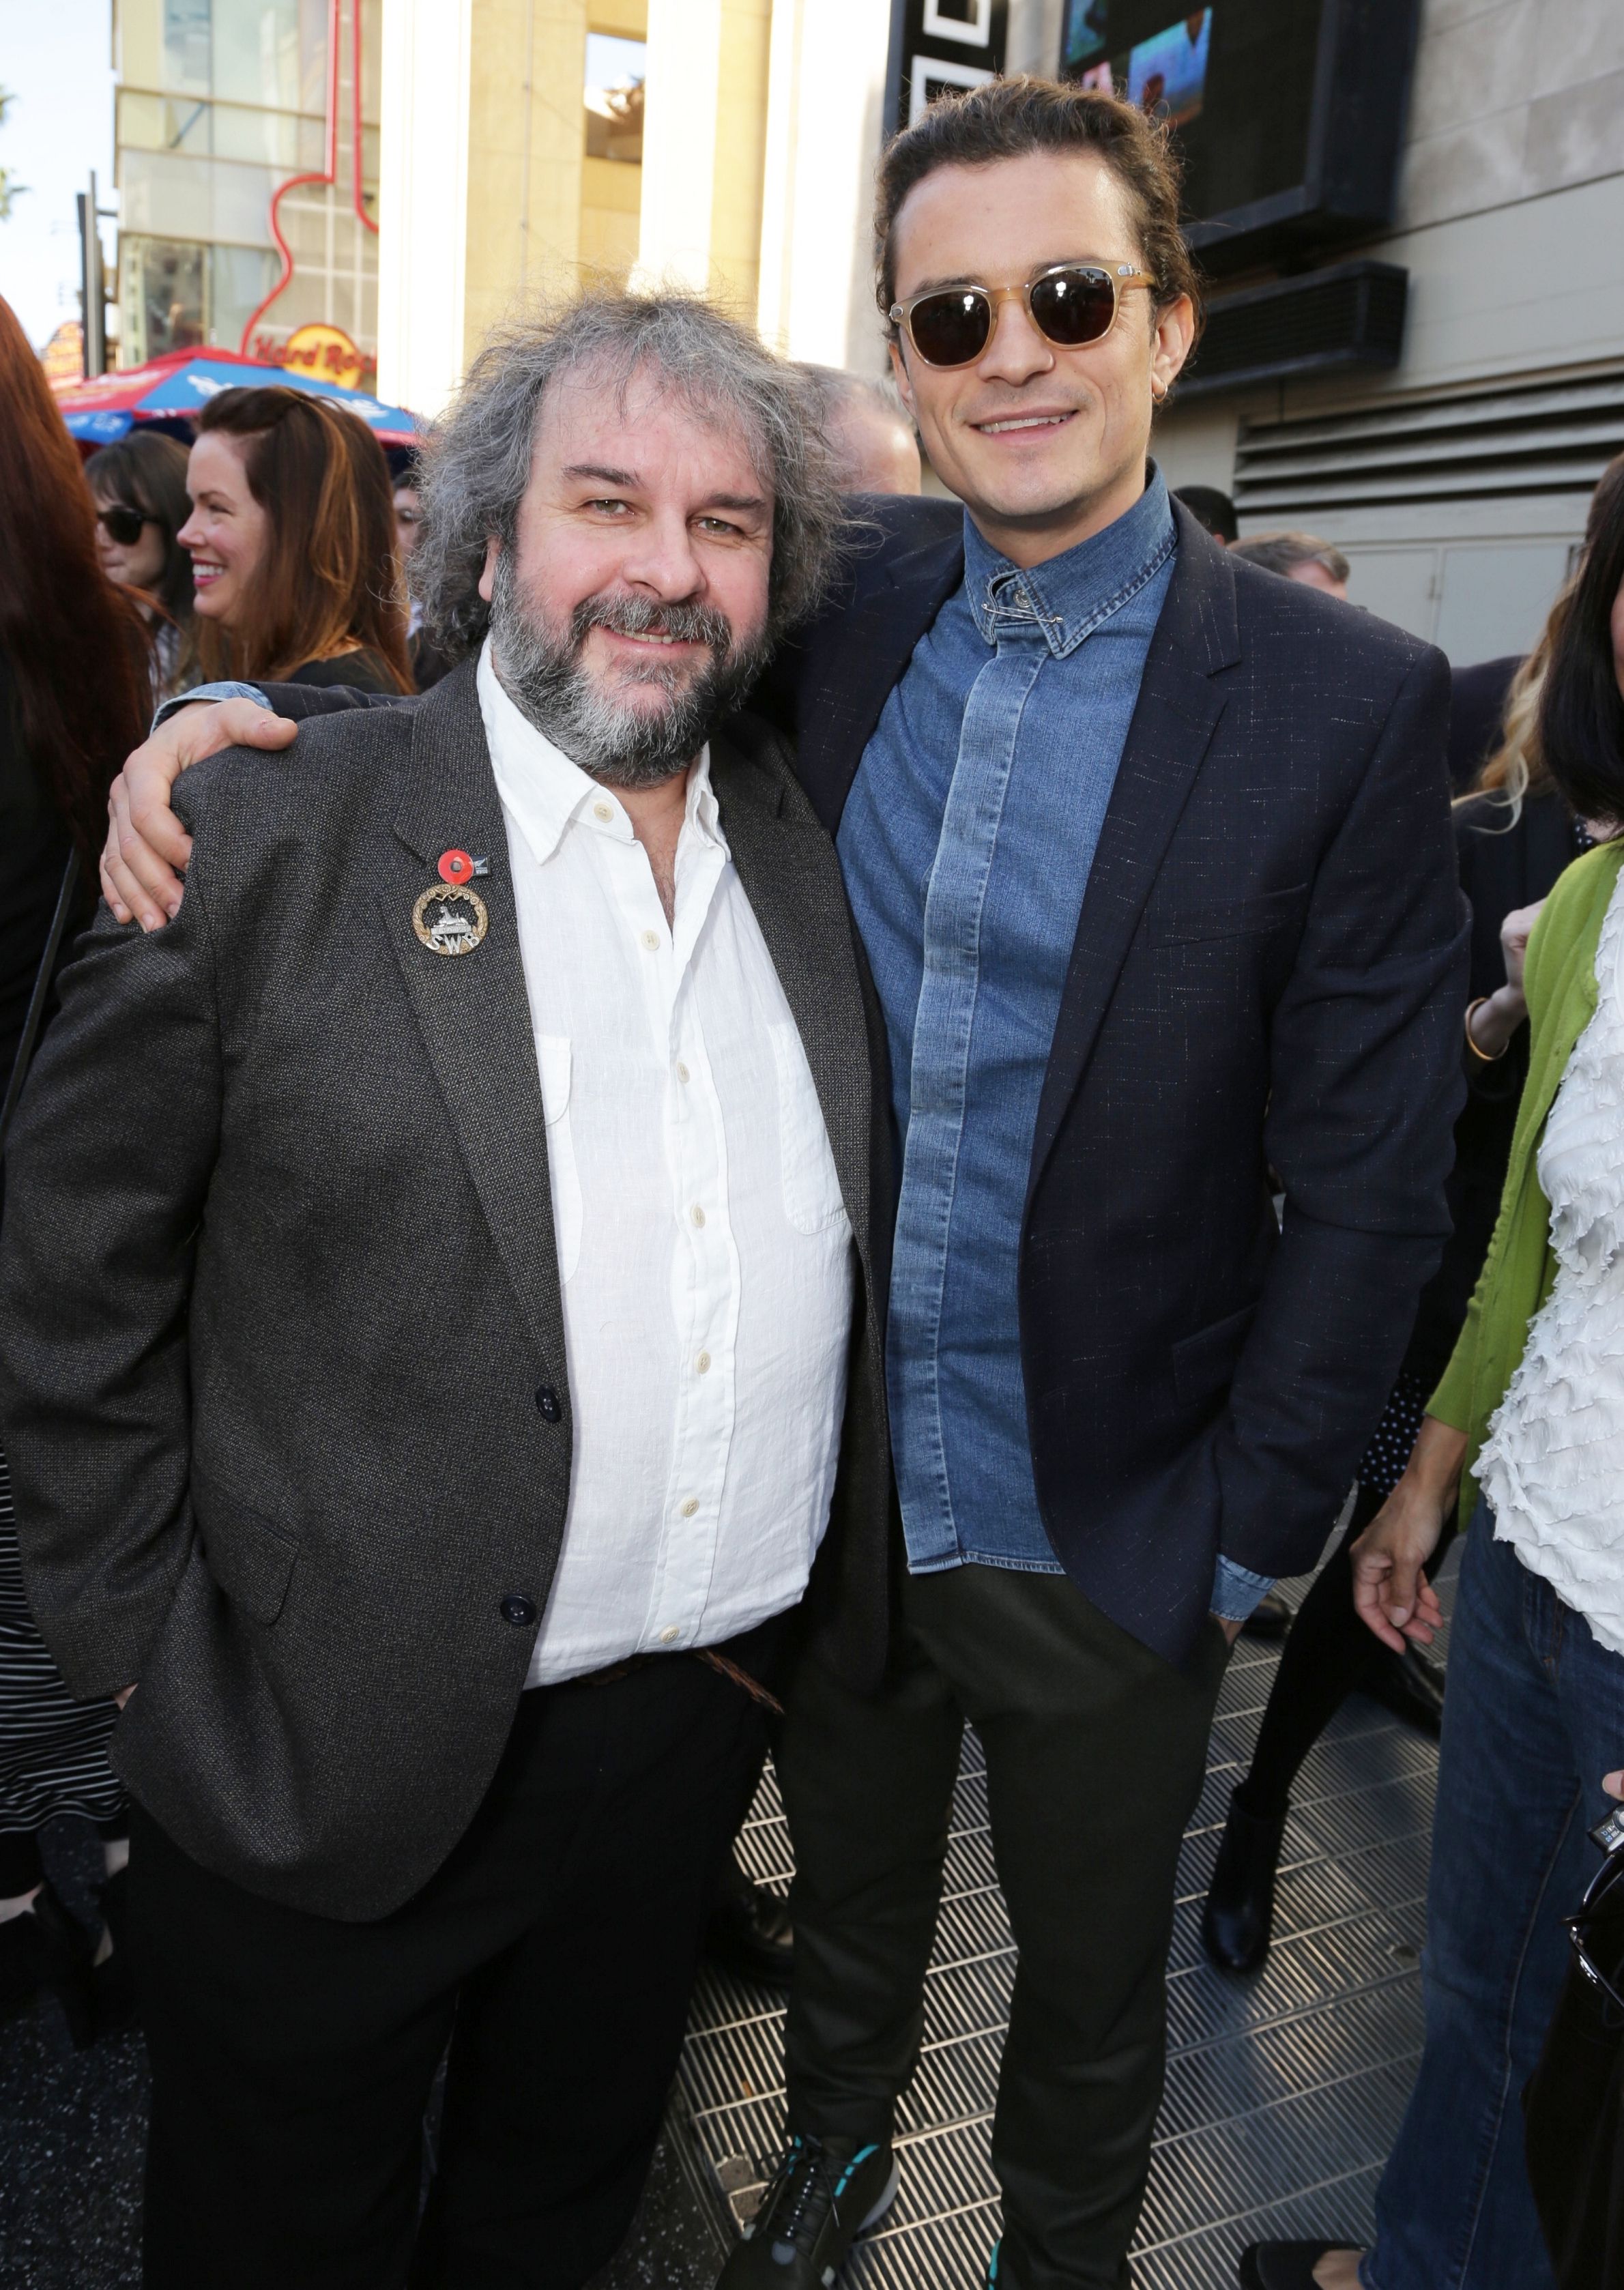 Peter Jackson and Orlando Bloom at his Walk of Fame star eve